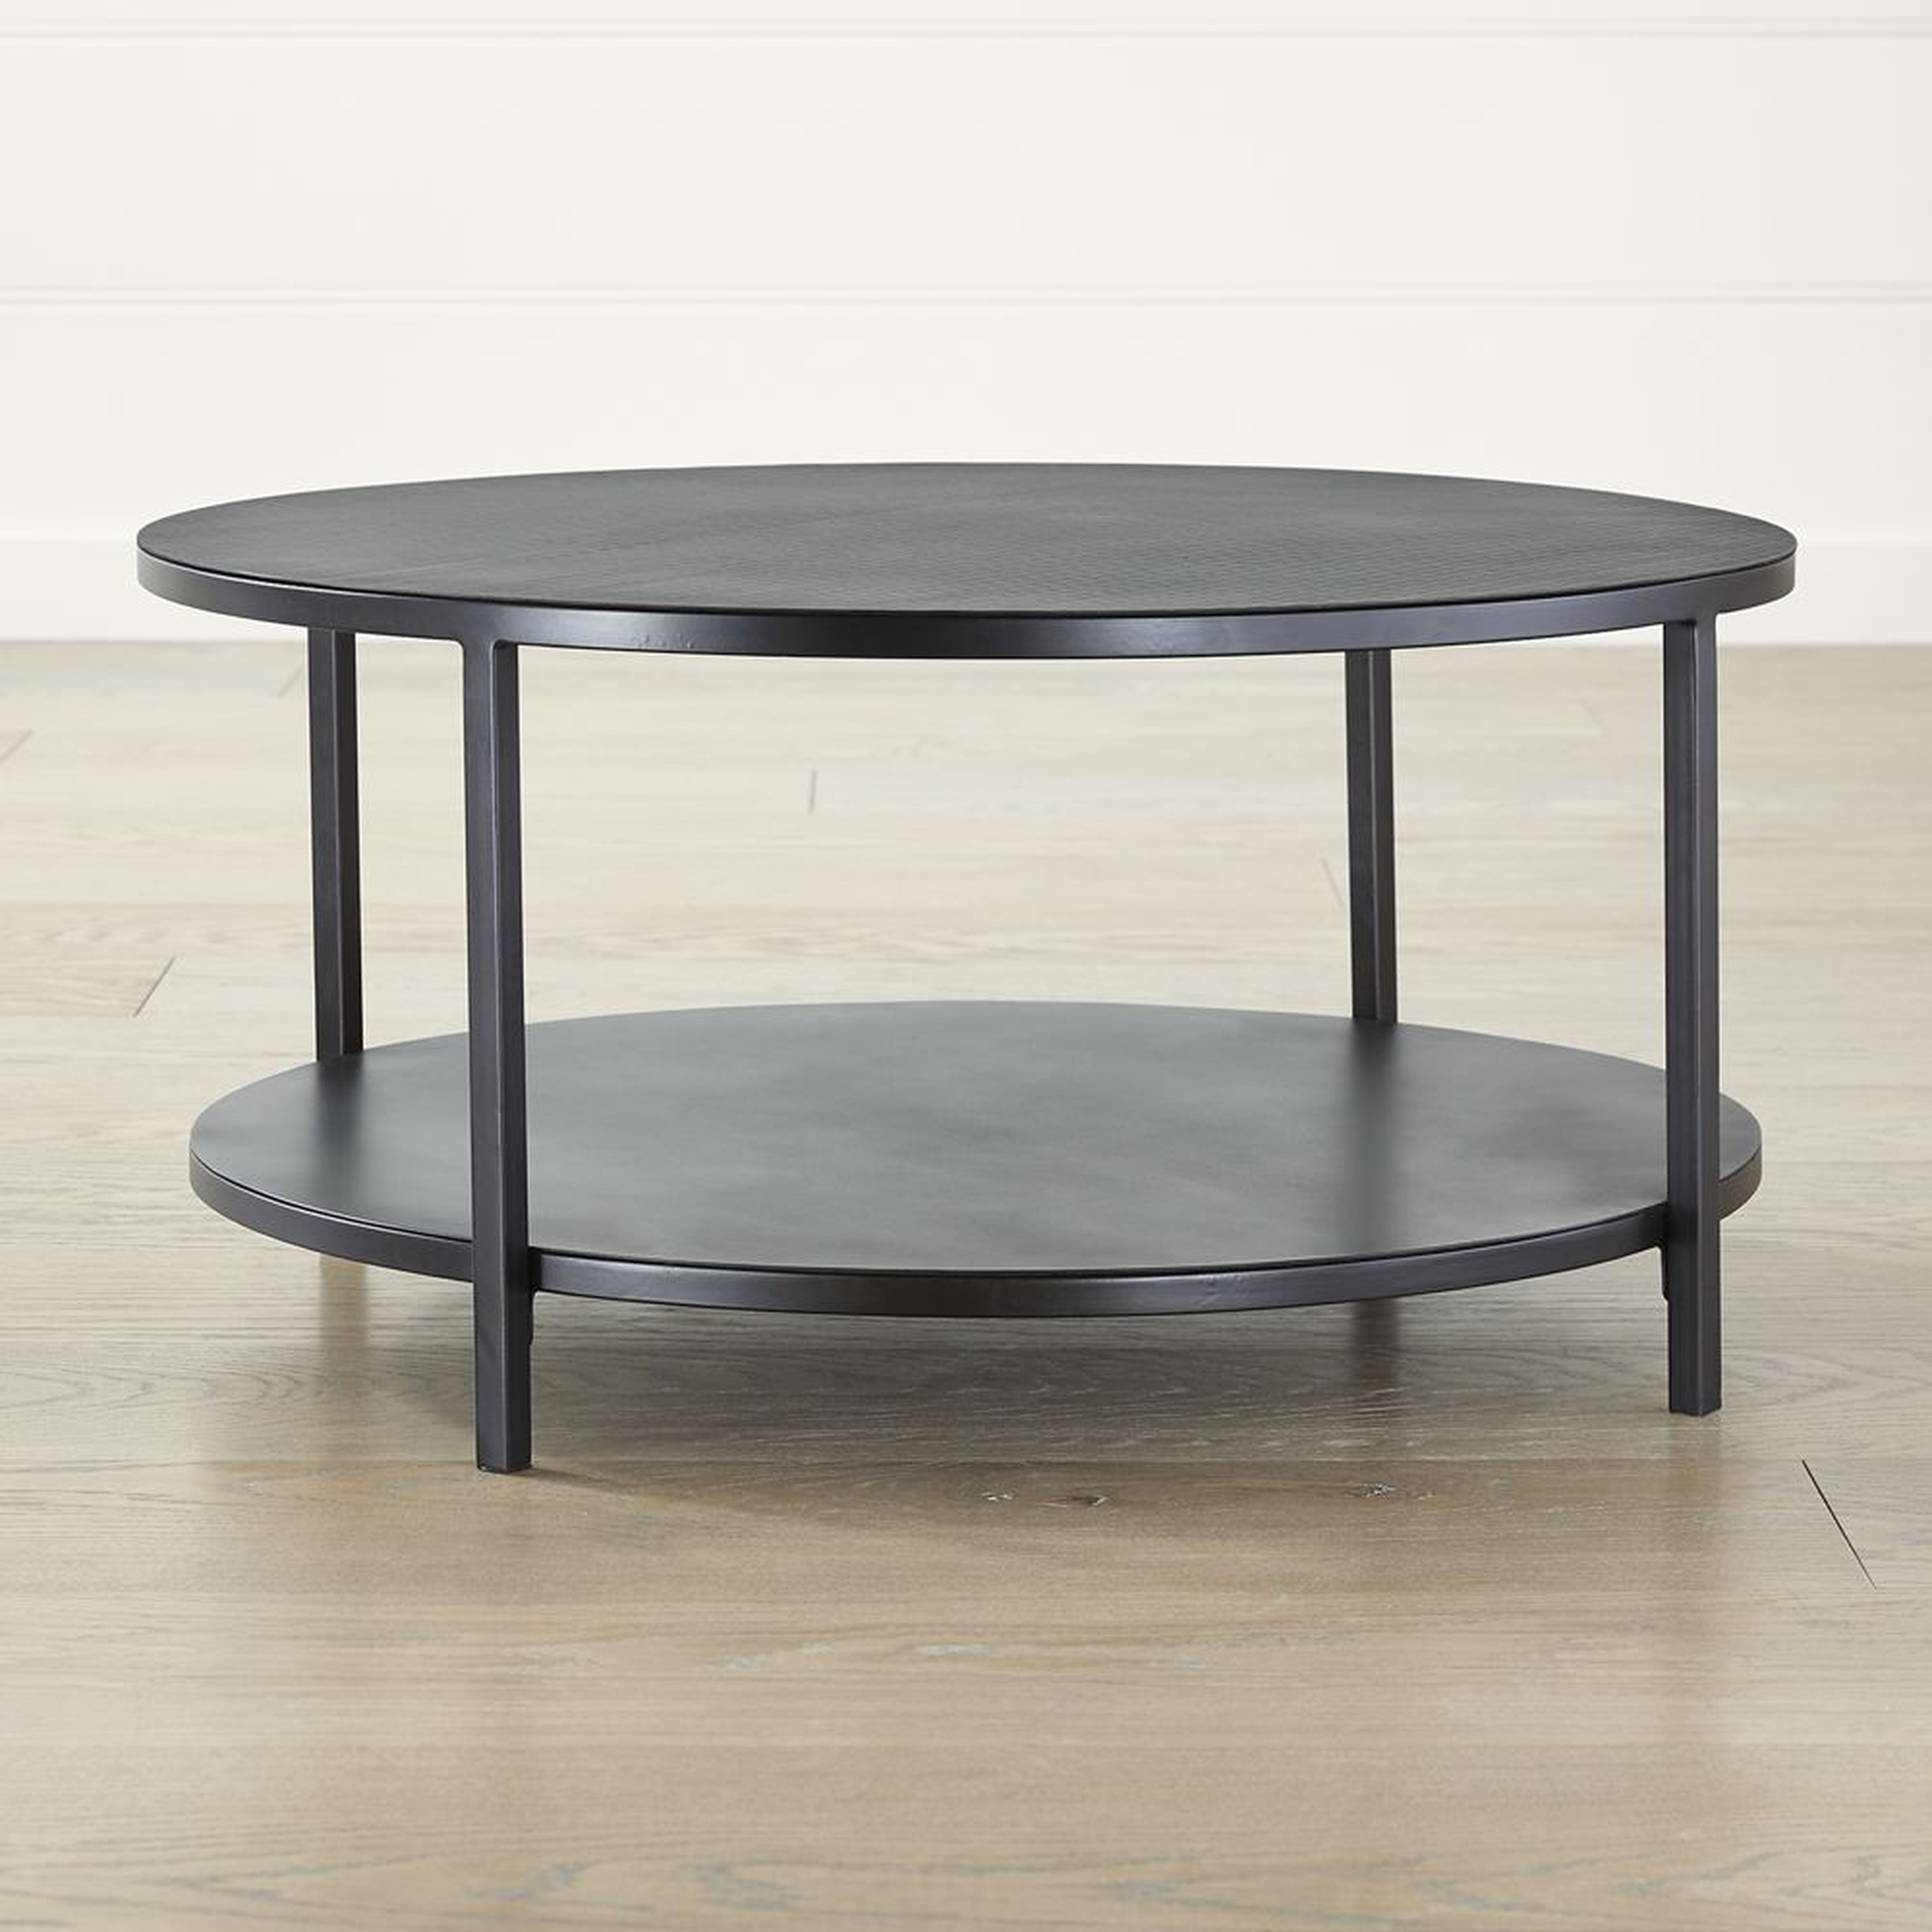 Echelon Round Coffee Table with Shelf - Crate and Barrel